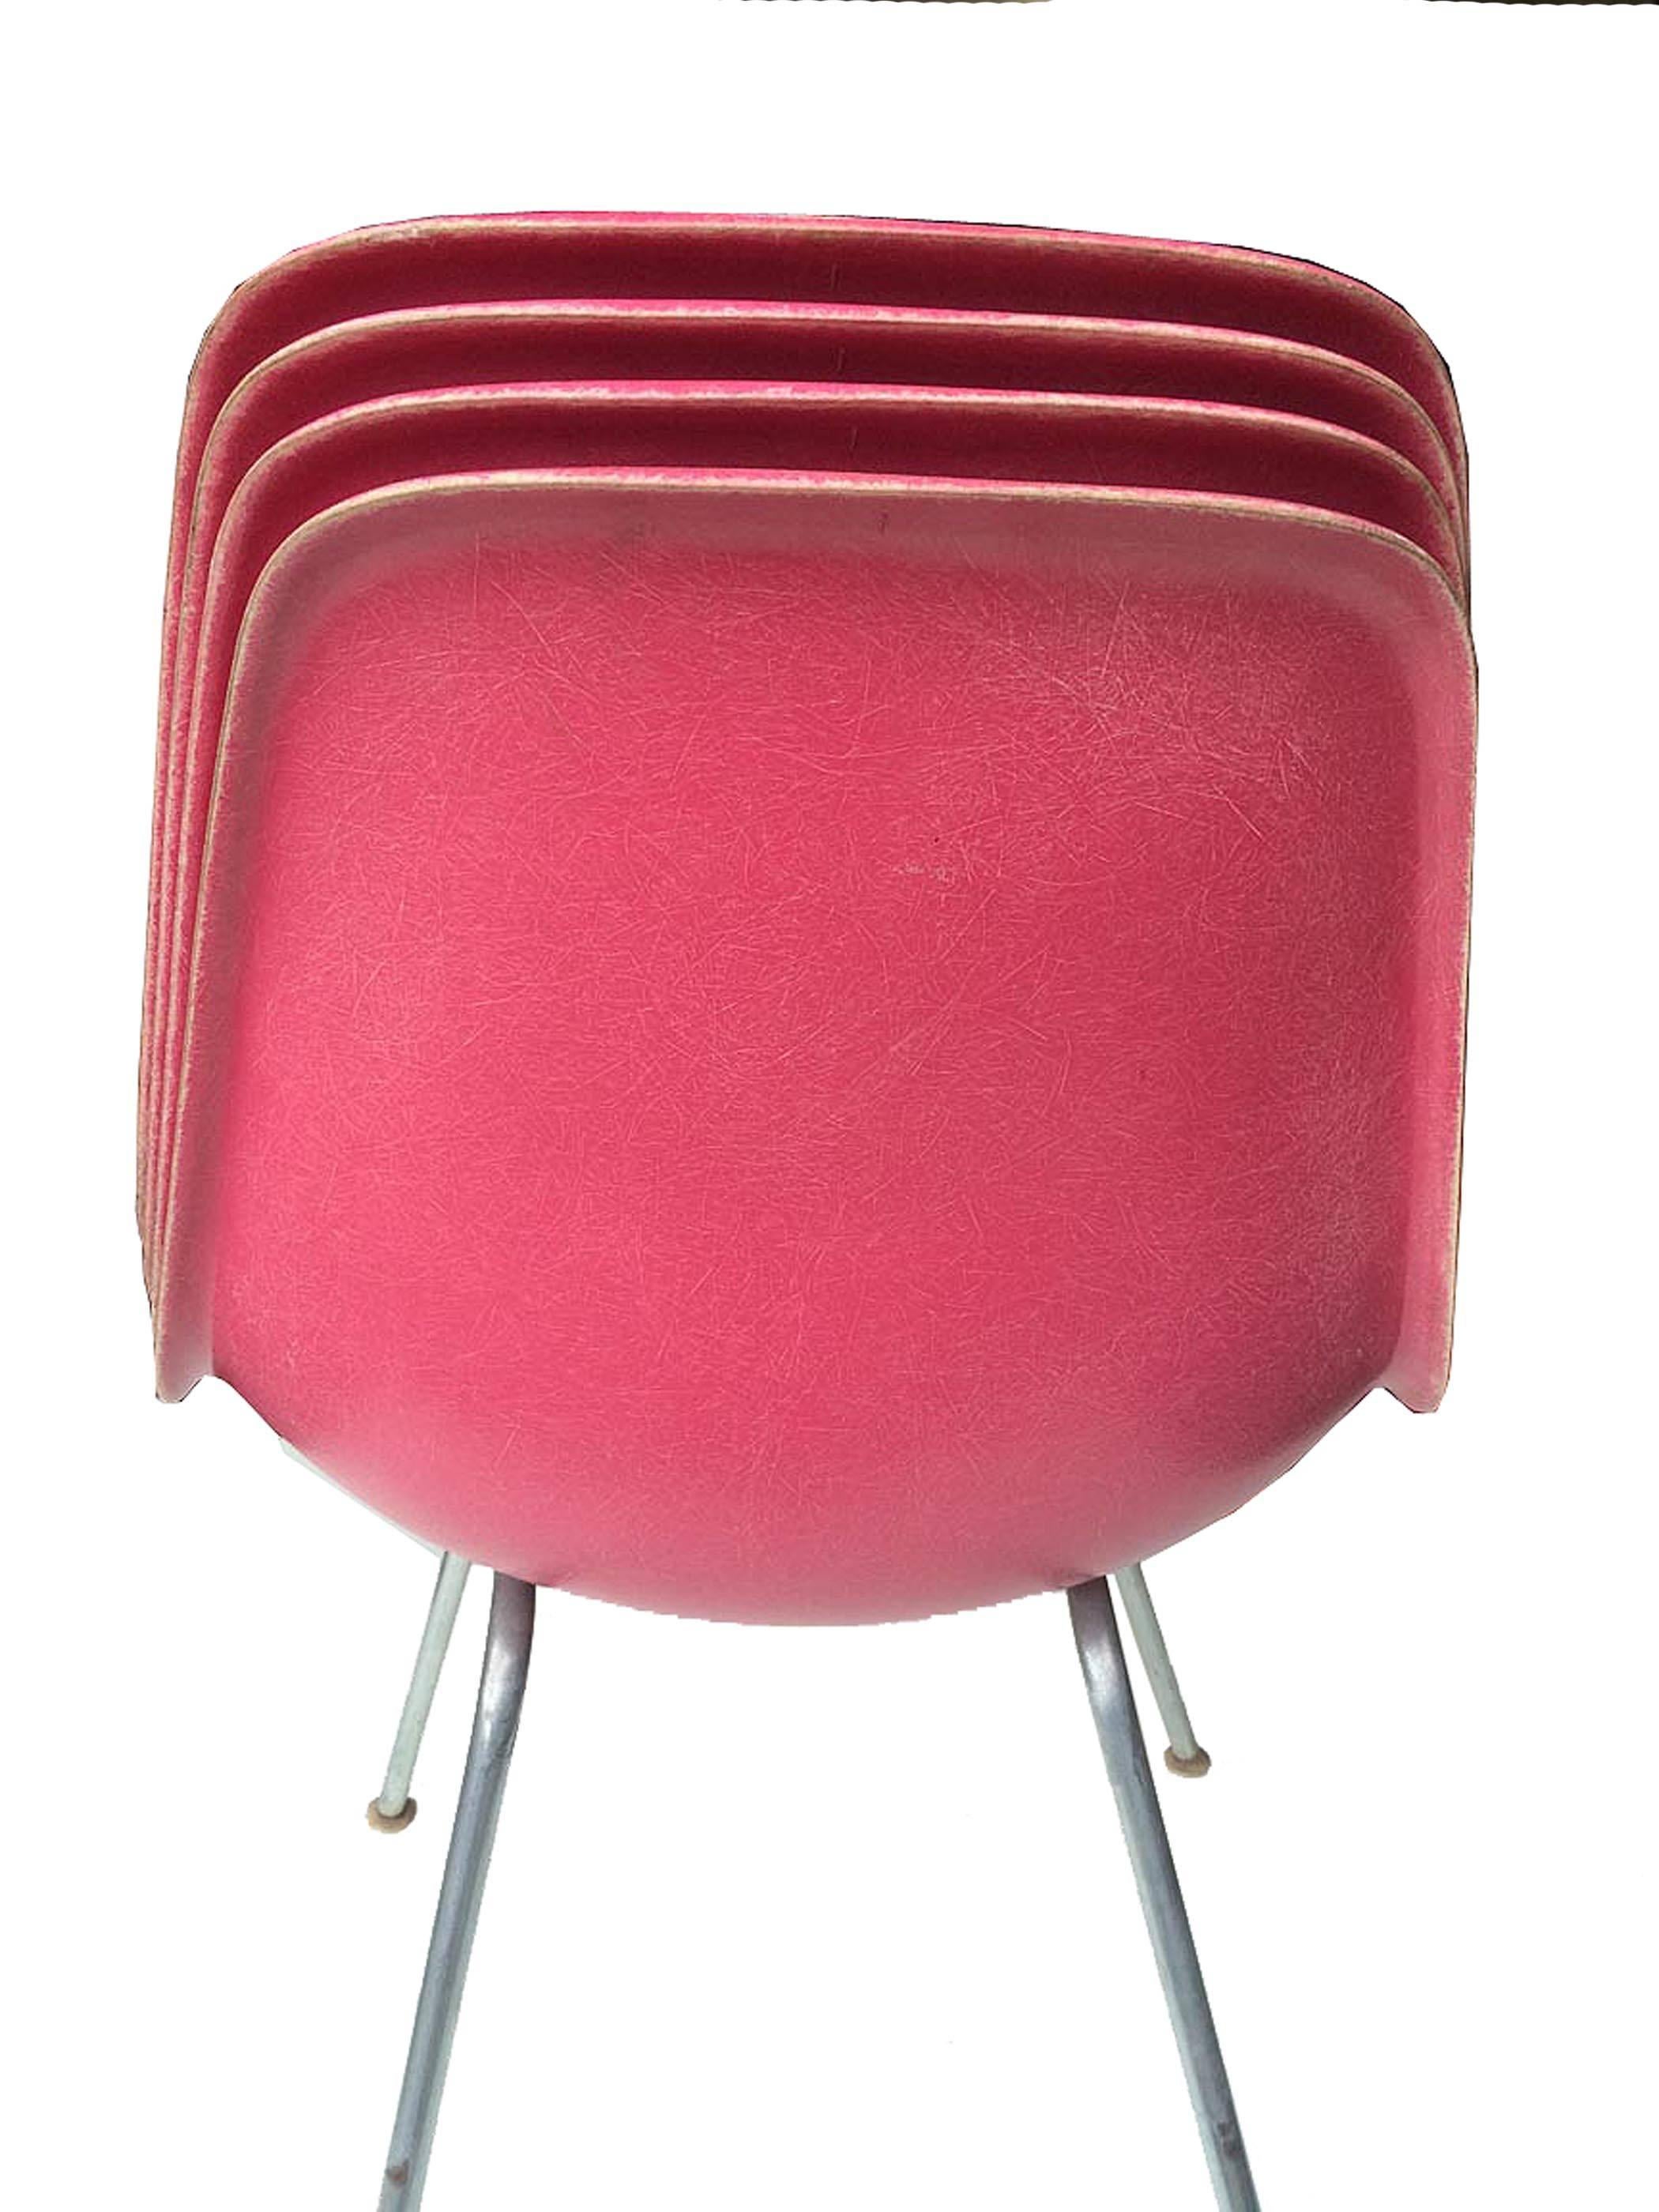 Among the rarest special order colors: Pink. Lovely set of 4 Herman Miller Eames fiberglass chairs on H base. Other bases available: Lounge, Eiffel, Dowel. Very good vintage condition with normal wear and use. Not many sets like this out there.